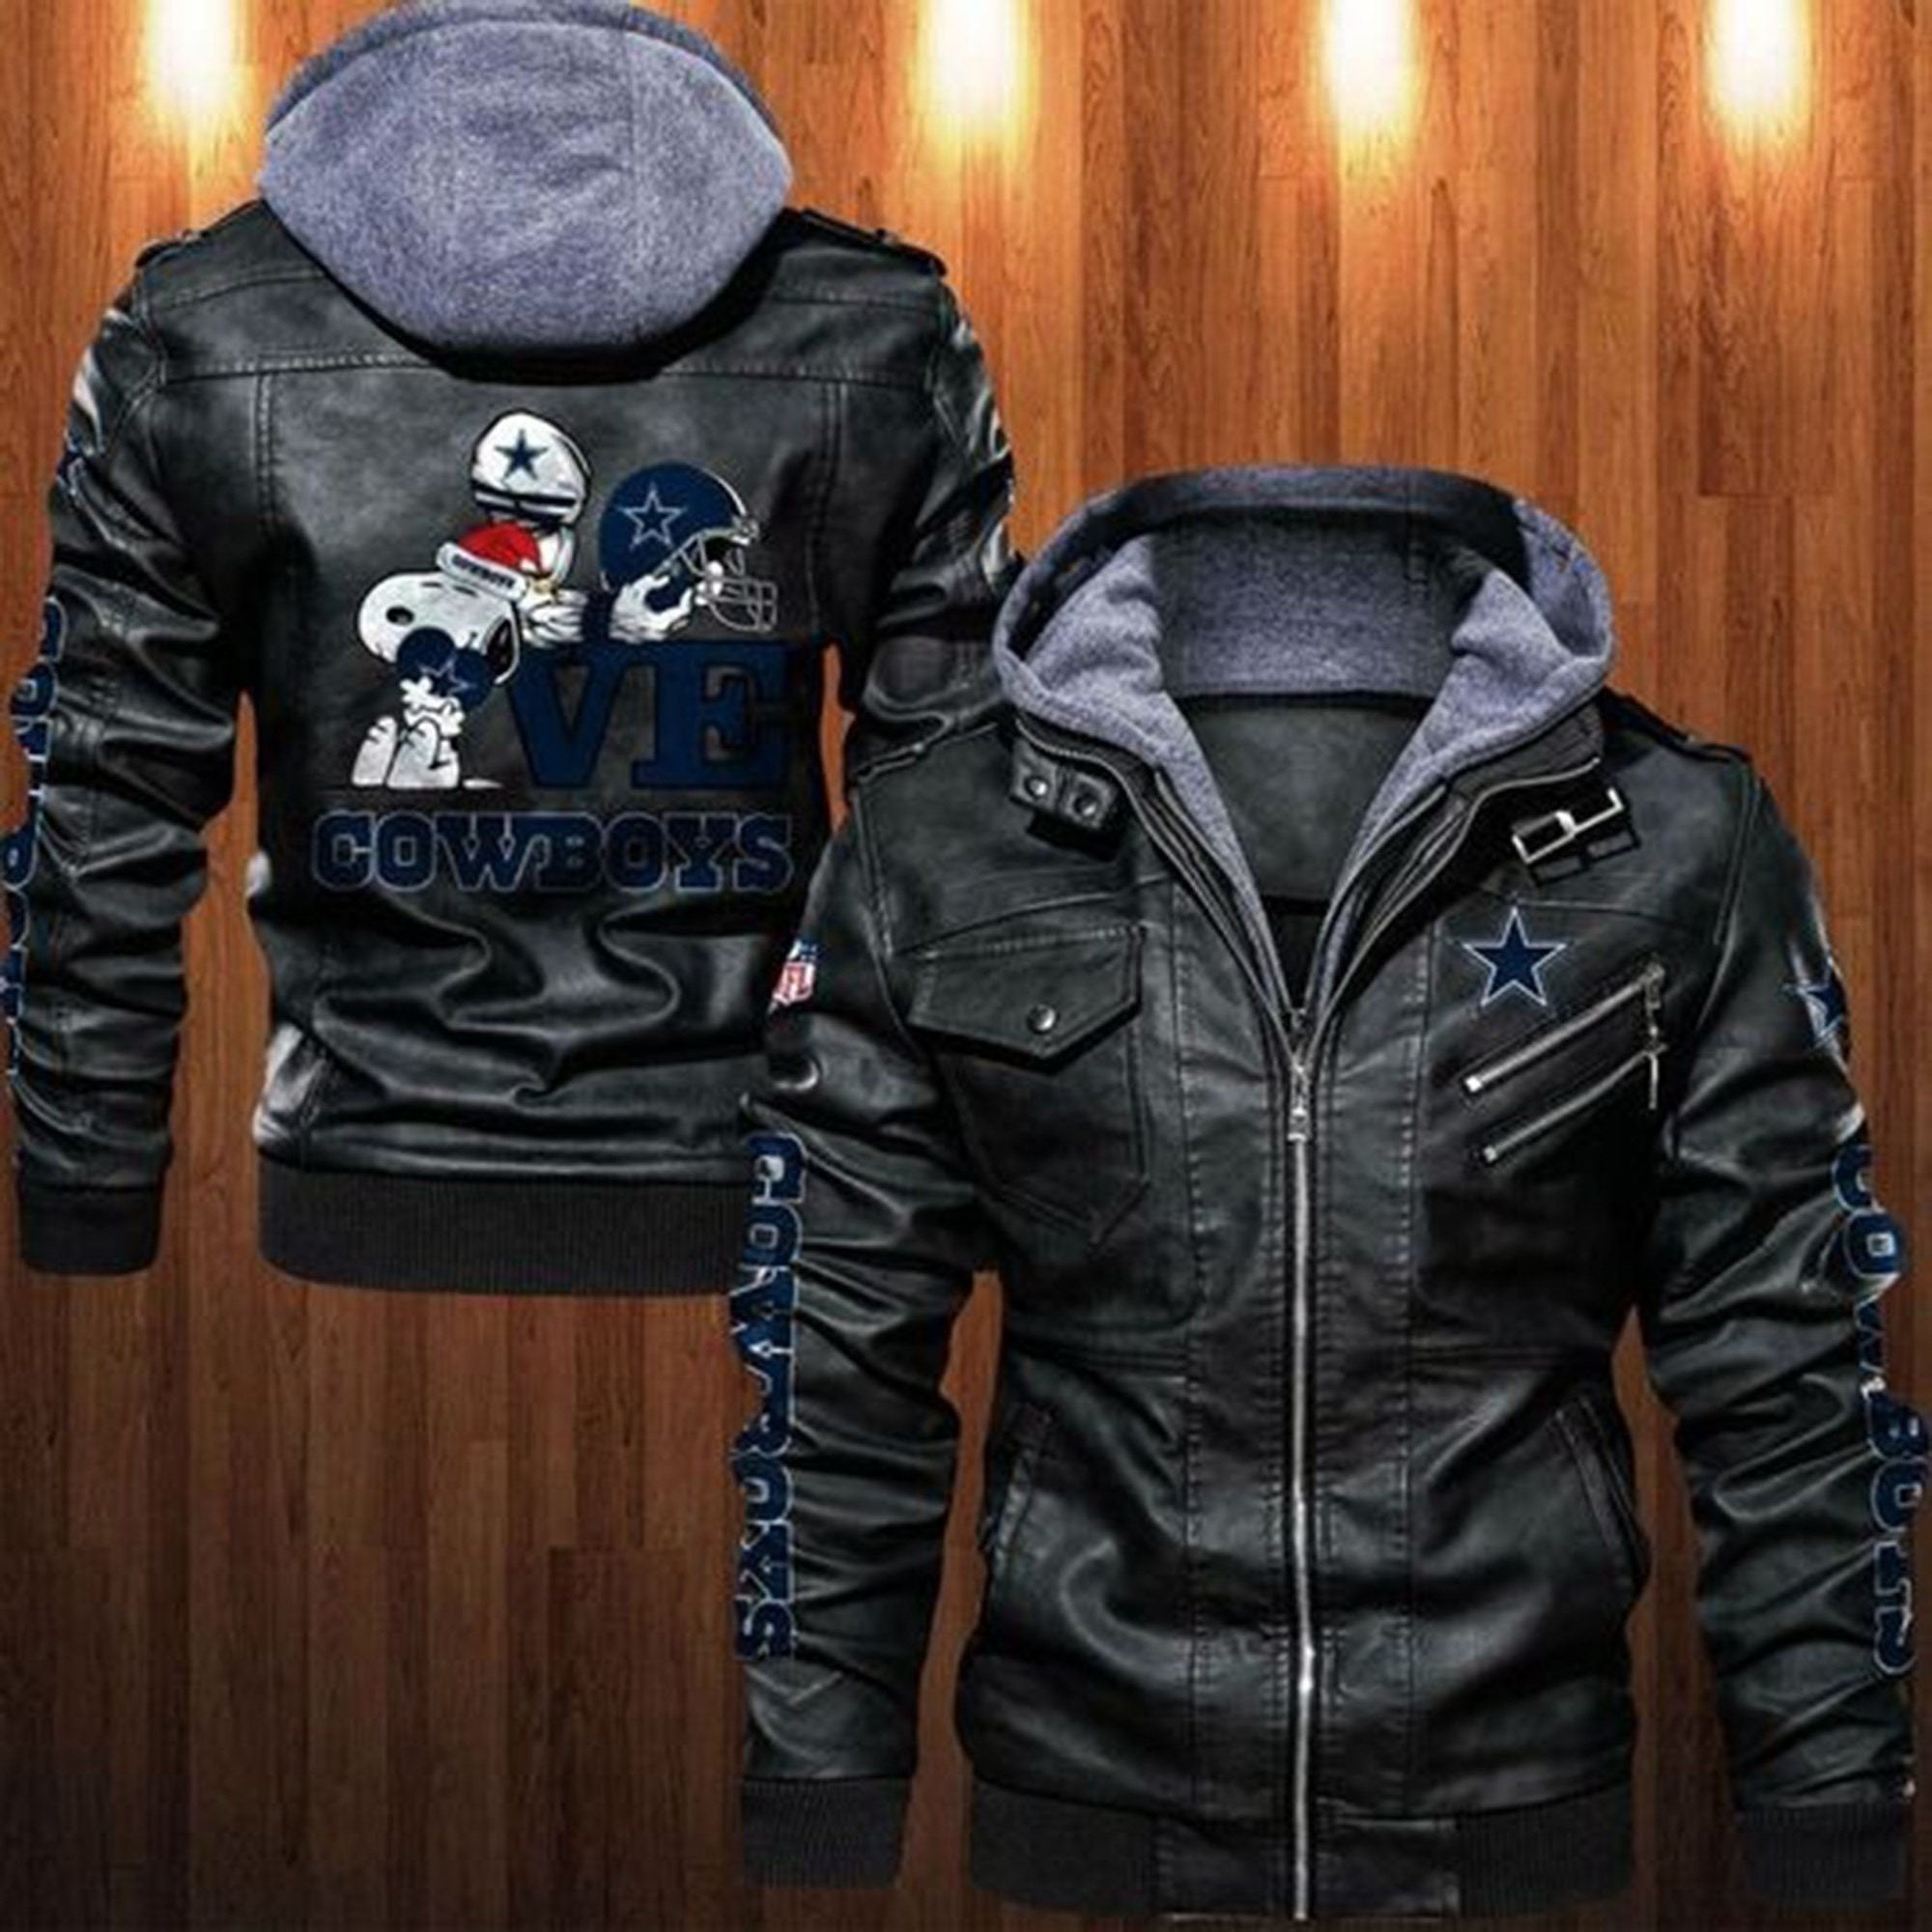 These Amazing Leather Jacket will add to the appeal of your outfit 90